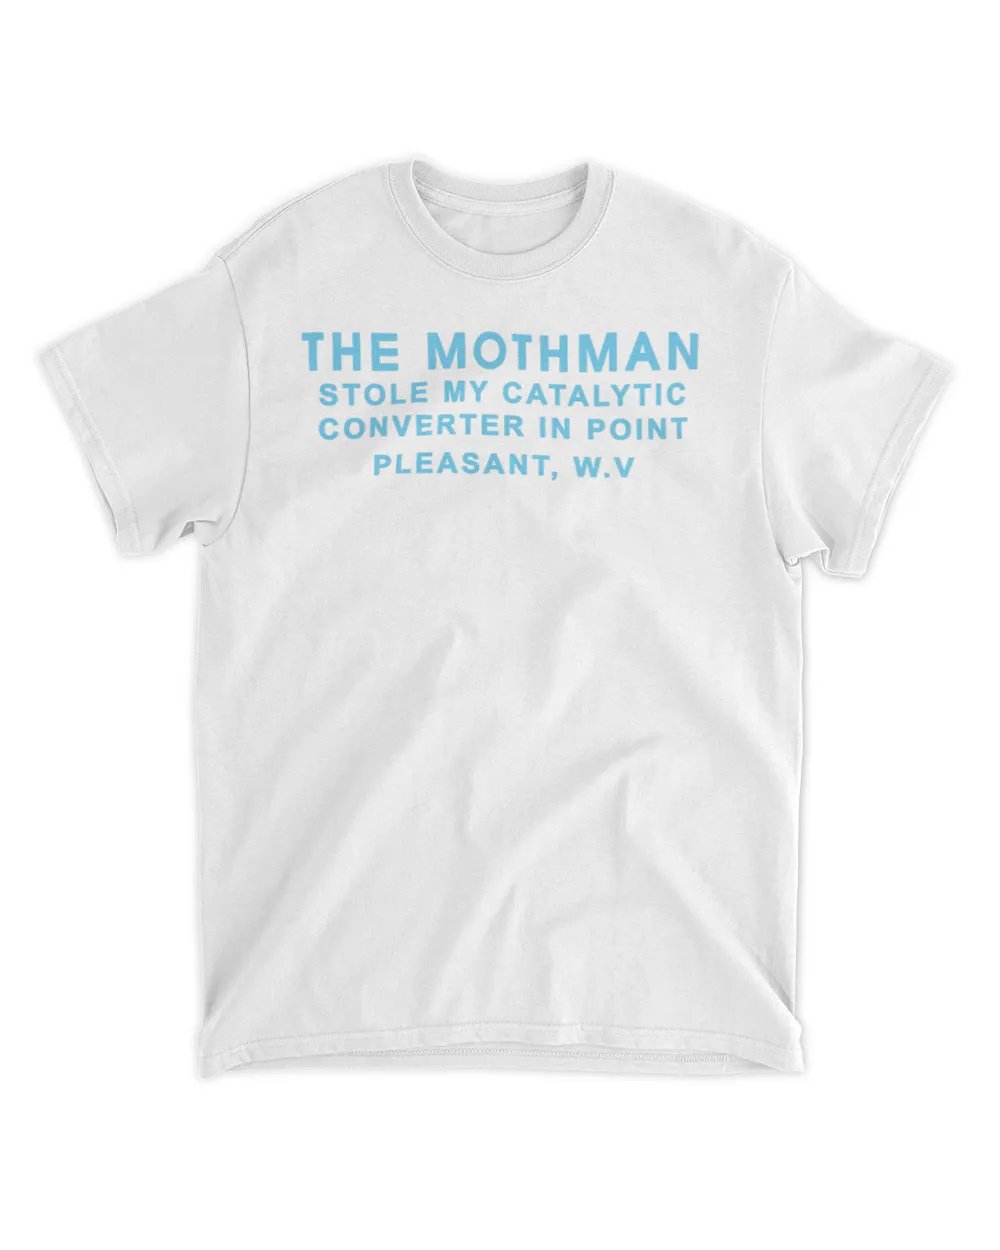  The mothman stole my catalytic converter in point pleasant shirt